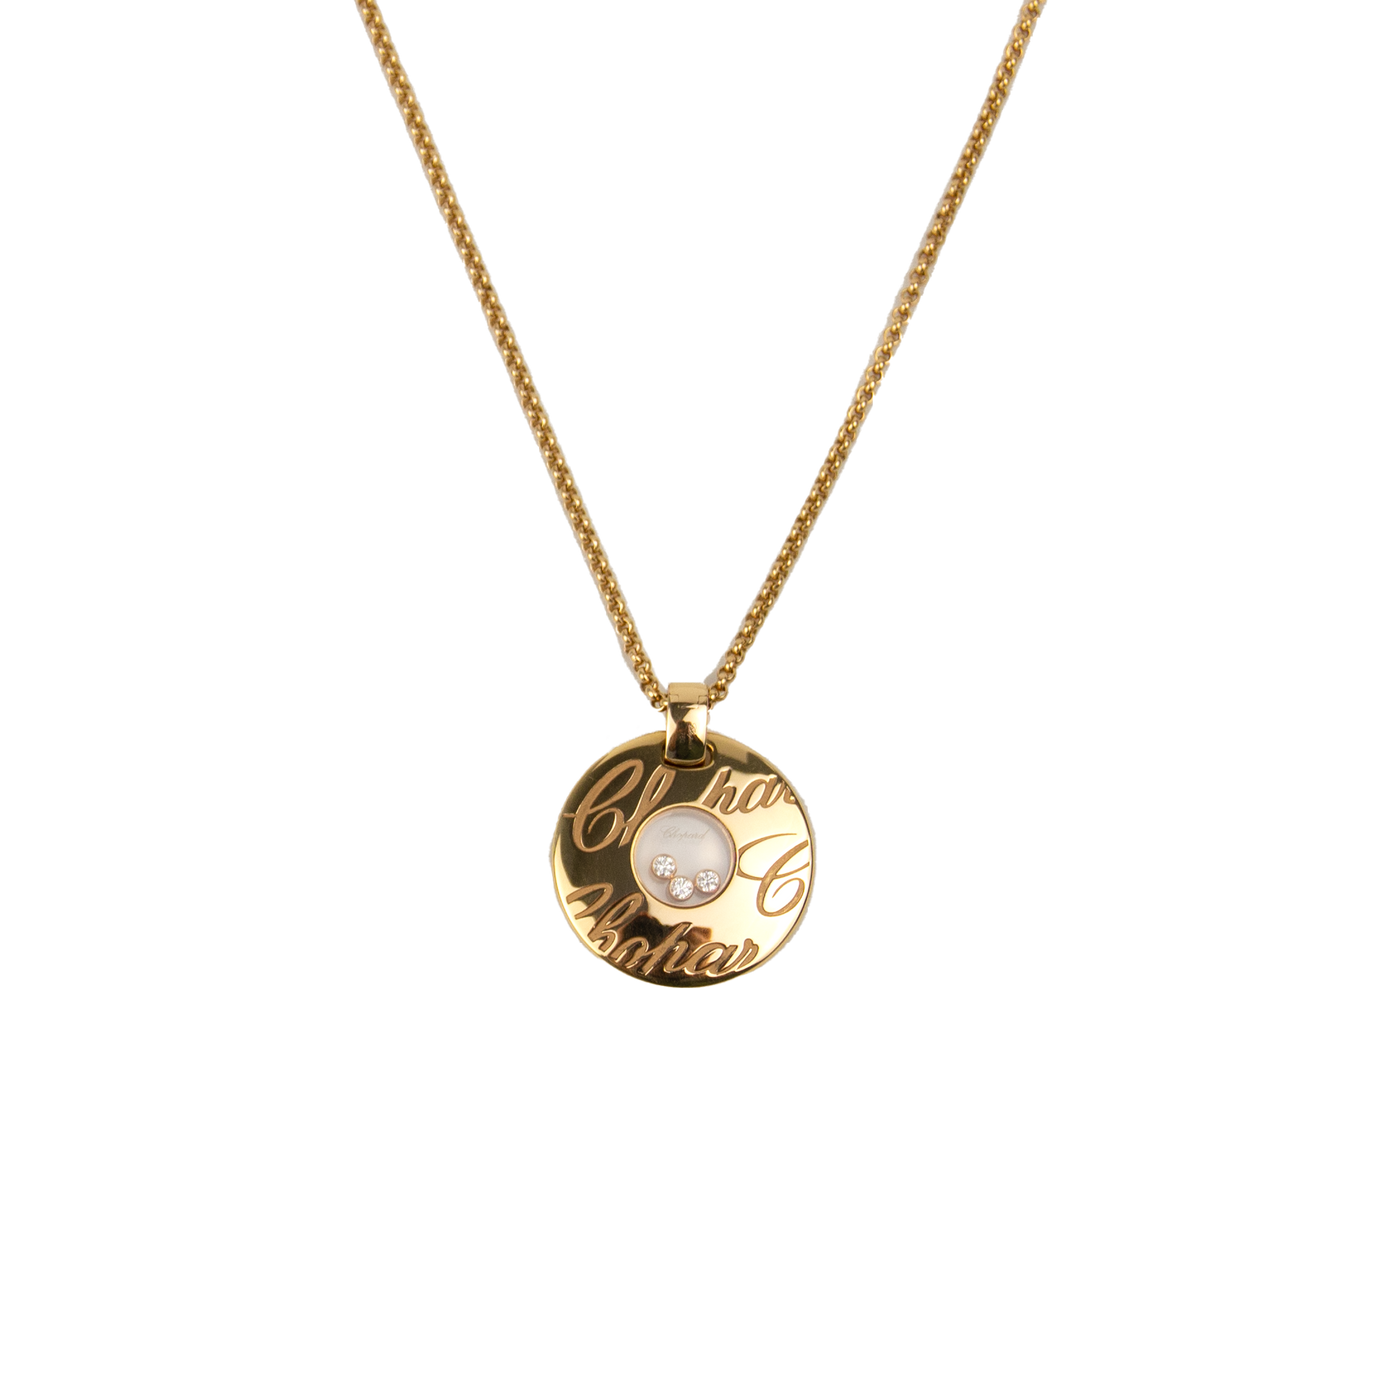 Chopard 18K Rose Gold "Chopardissimo" Necklace